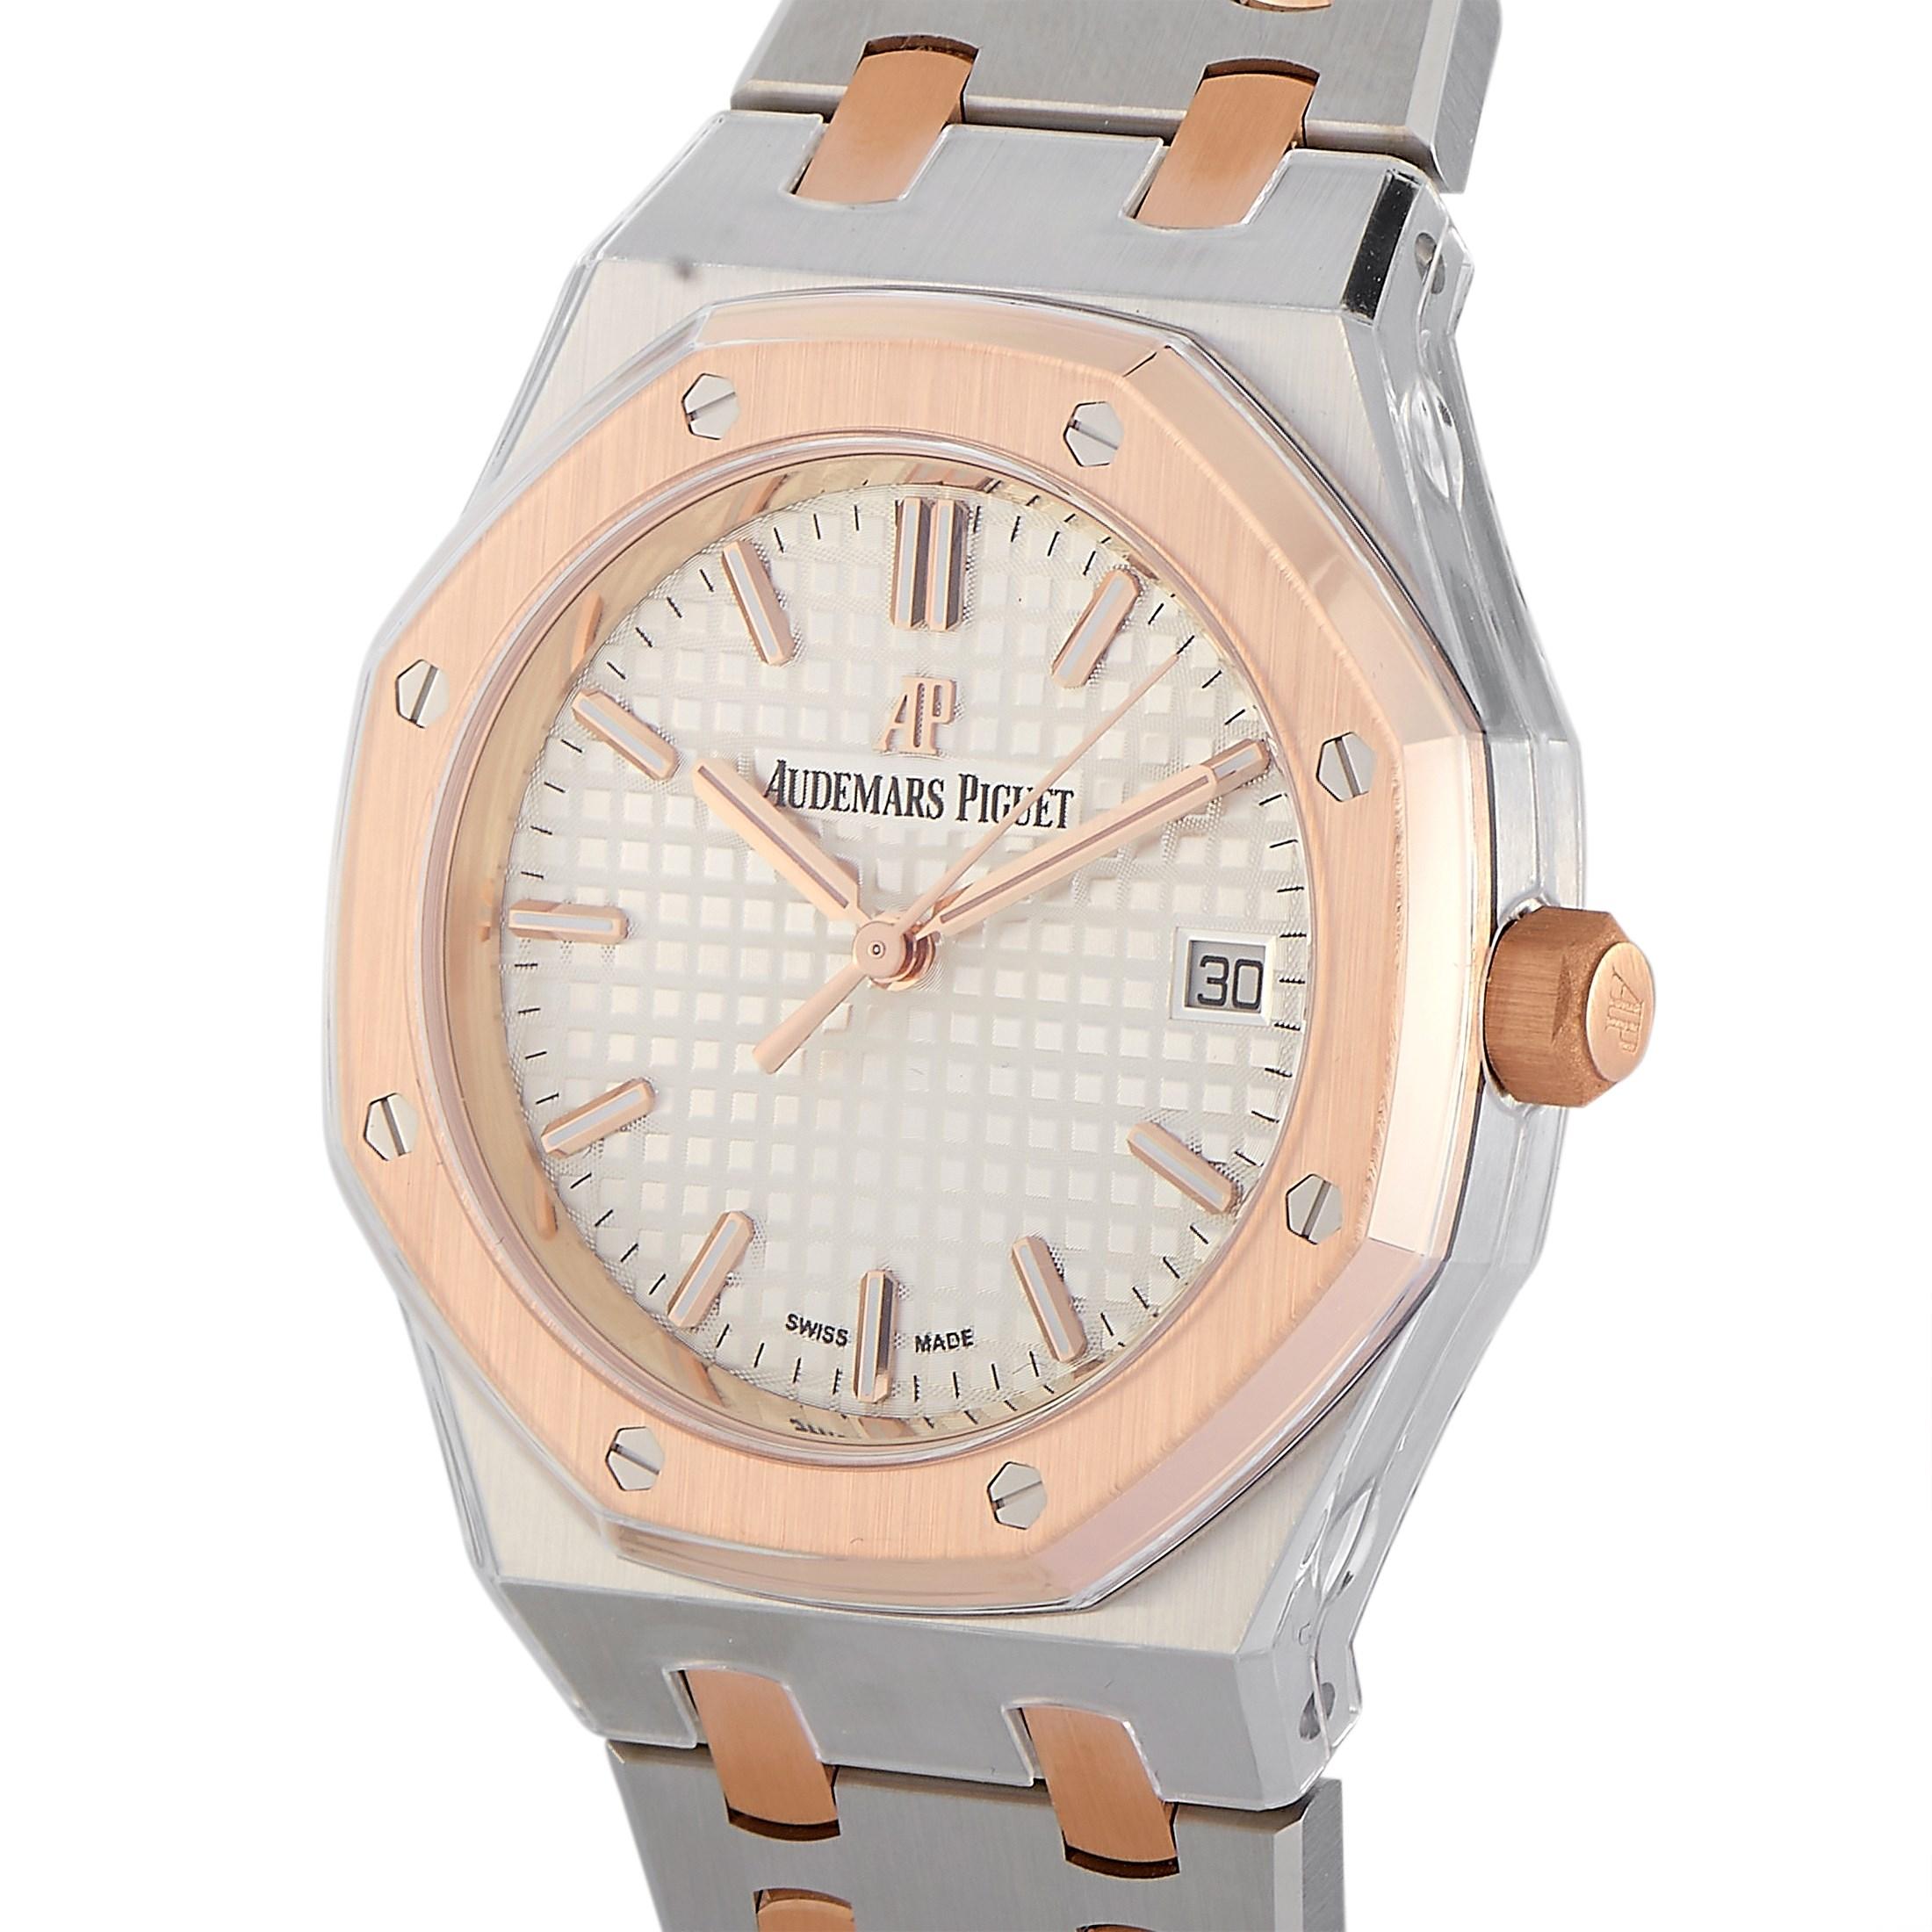 Designed for smaller wrists, this 34mm Royal Oak 77350SR.00.1261SR.01 will suit both men and women. This timepiece features the dynamic angles of Royal Oak including the iconic octagonal bezel with eight gold screws. The bezel is in 18K rose gold